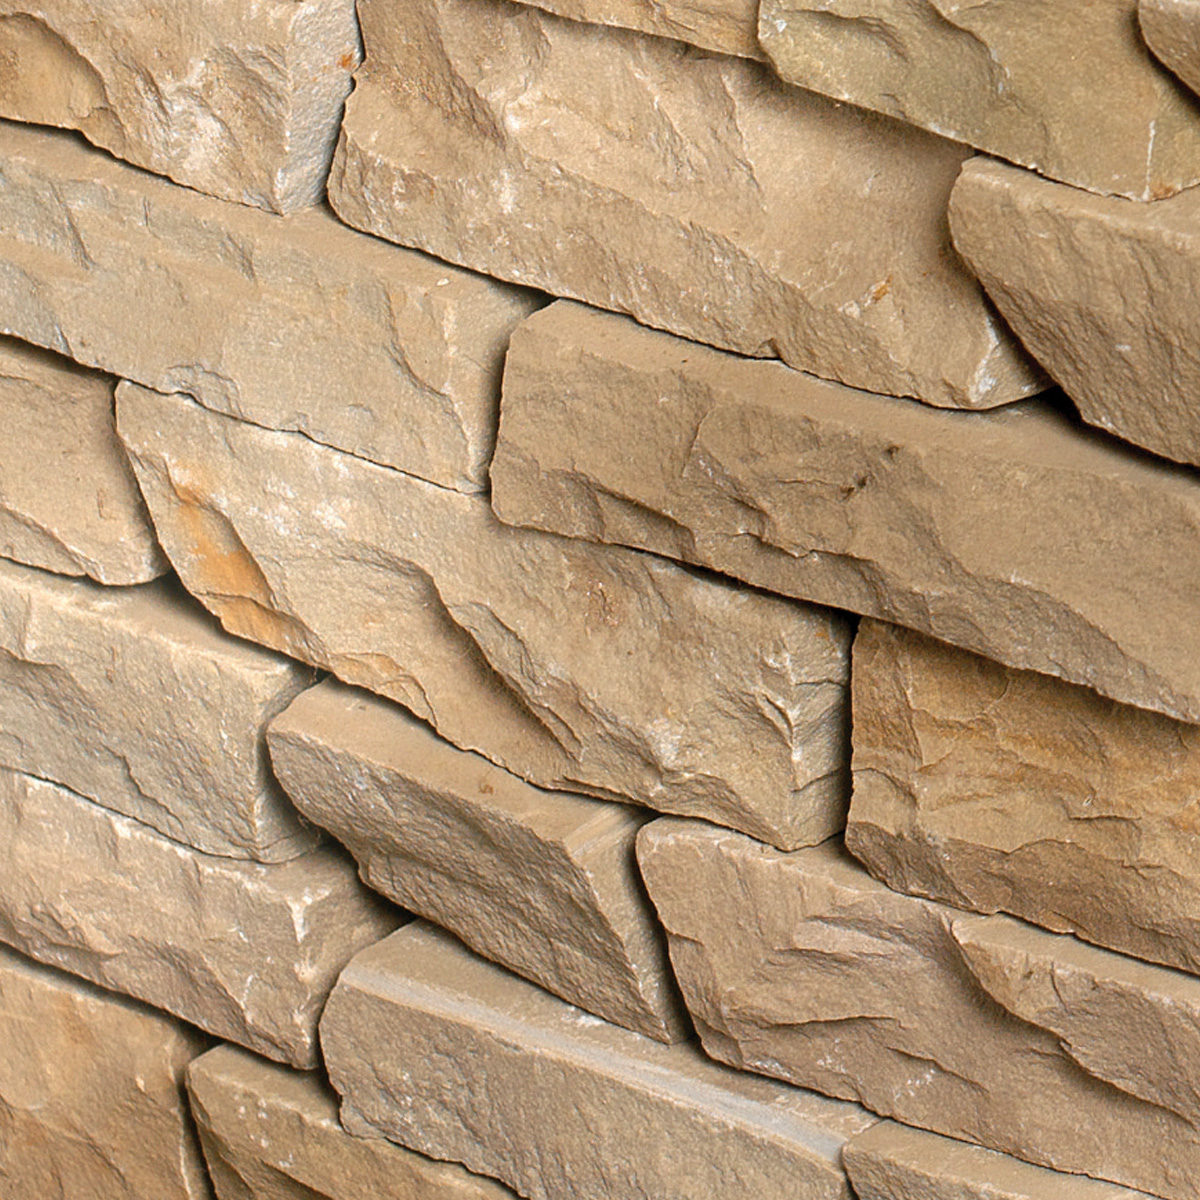 Fossil Indian Sandstone Dry Fell Walling